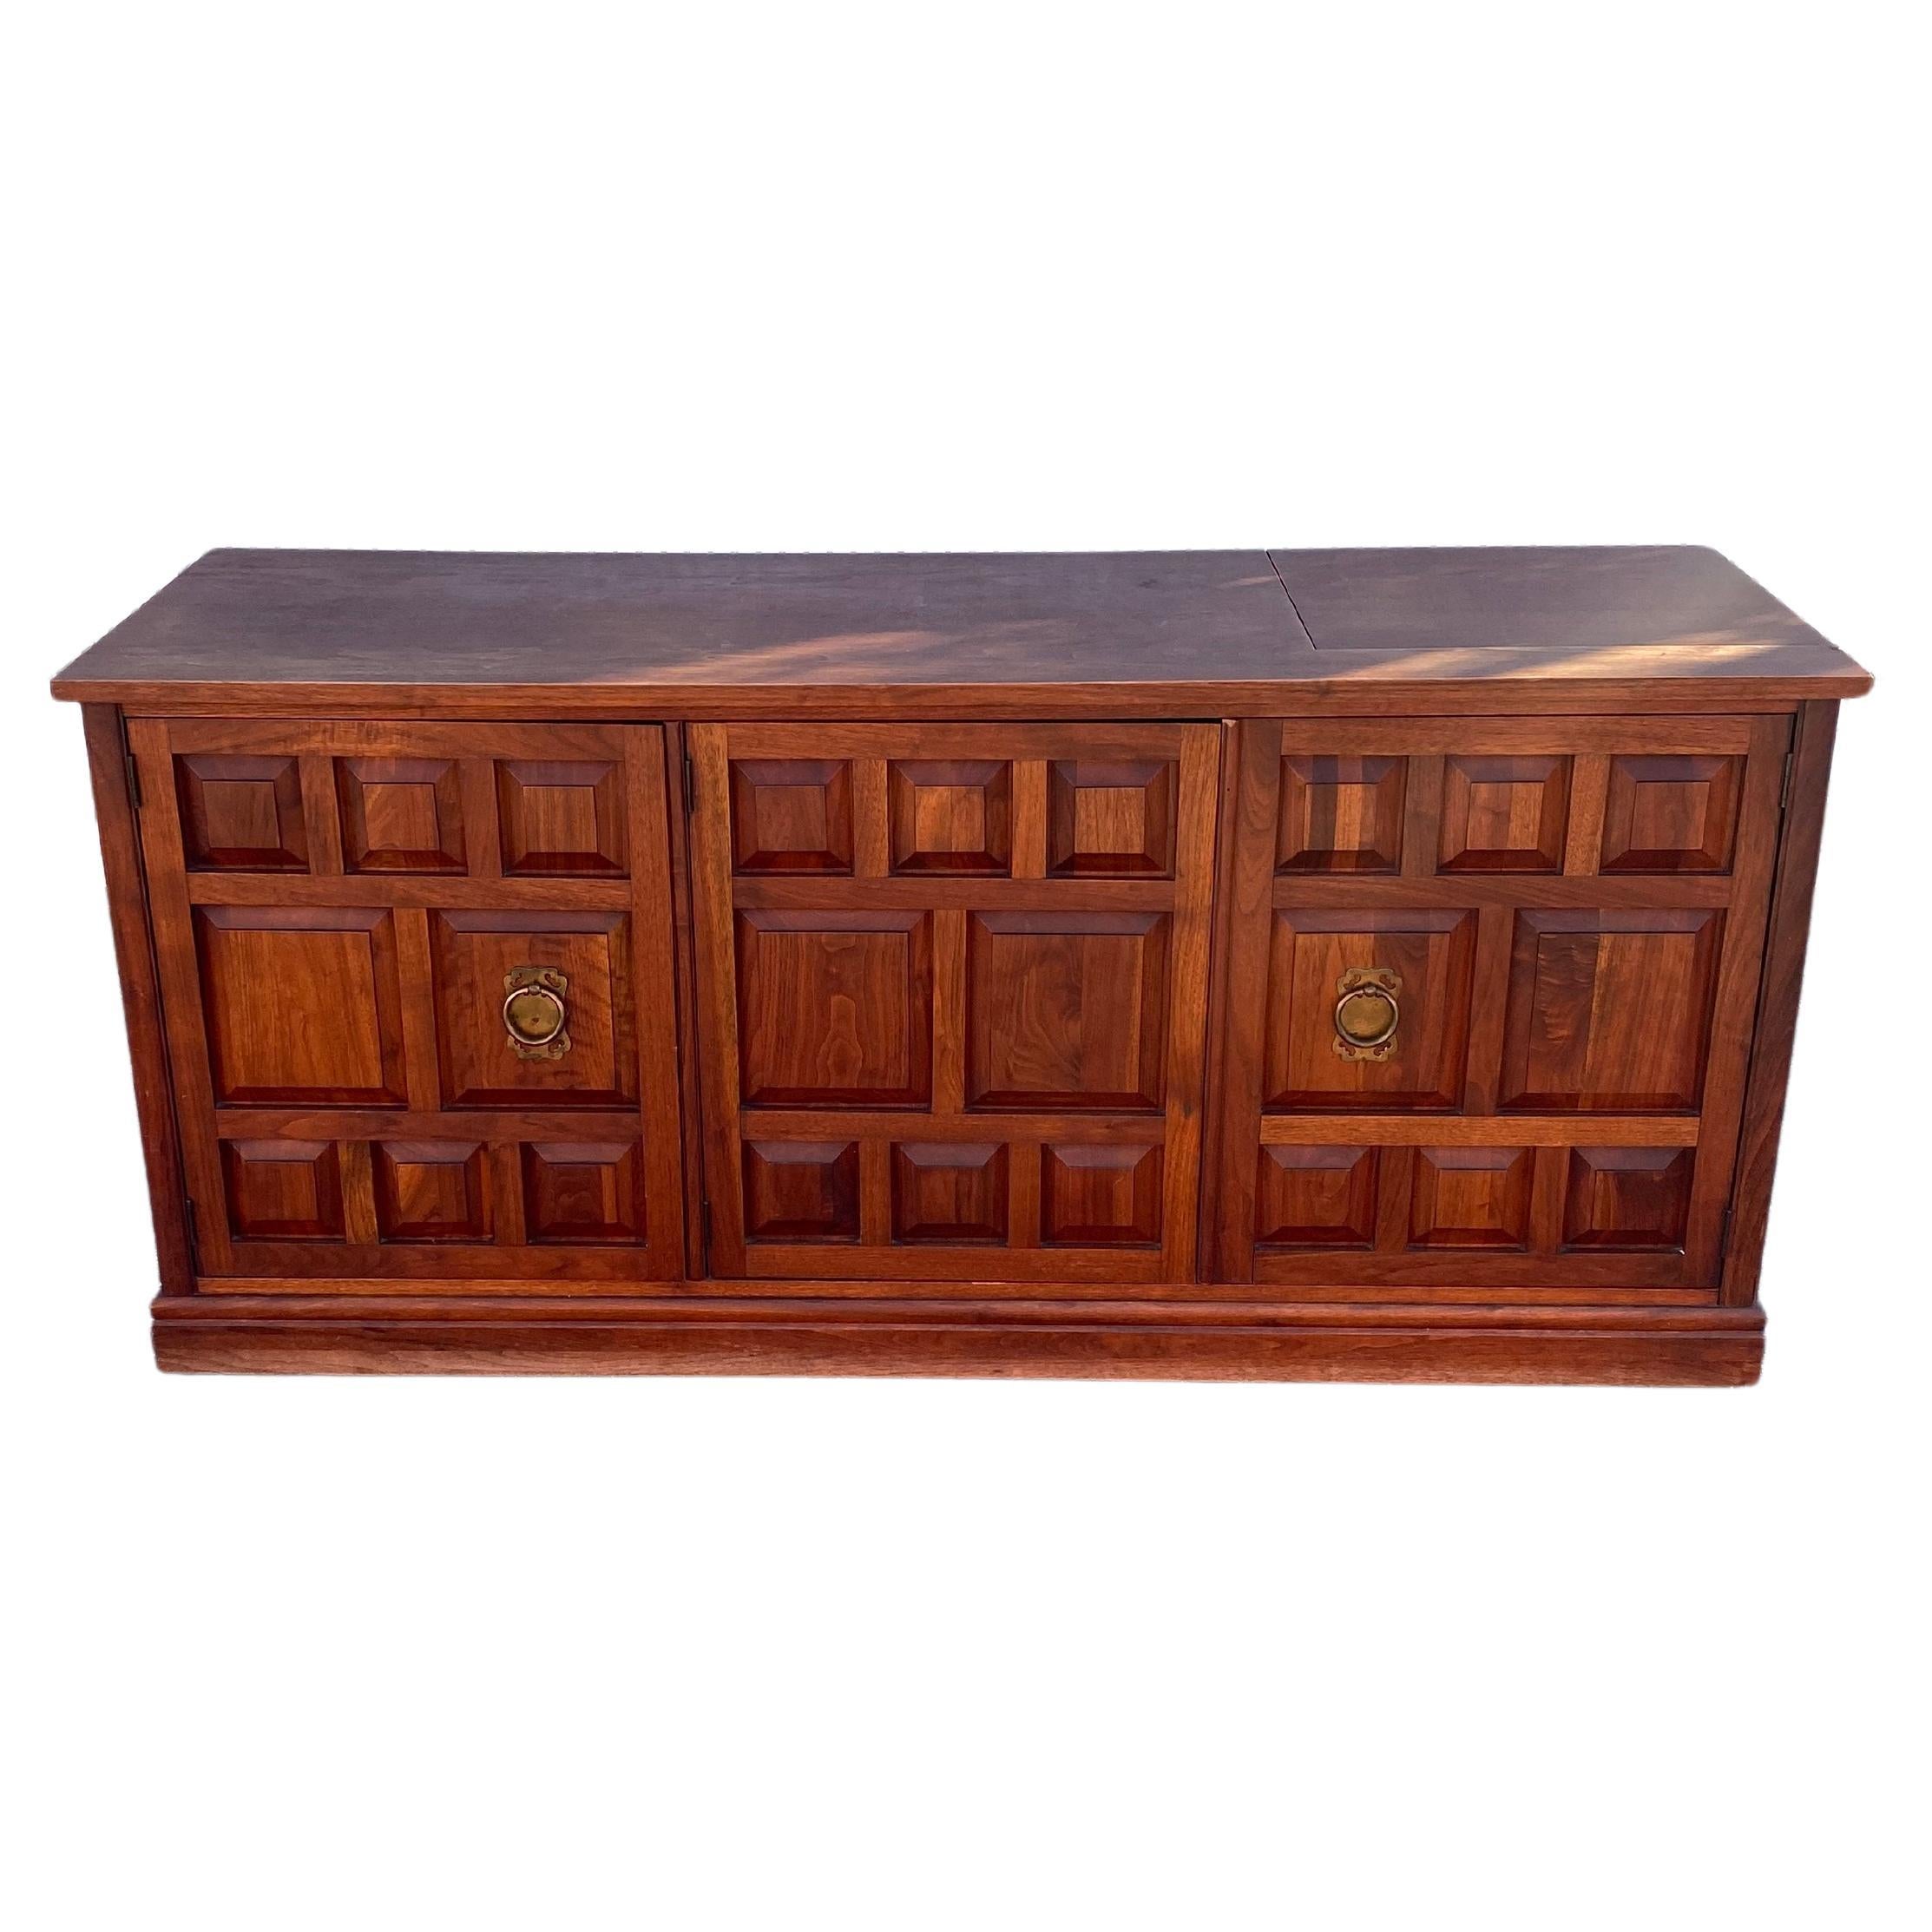 1960s Widdicomb Spanish Baroque Style Wood SideBoard Storage Cabinet For Sale